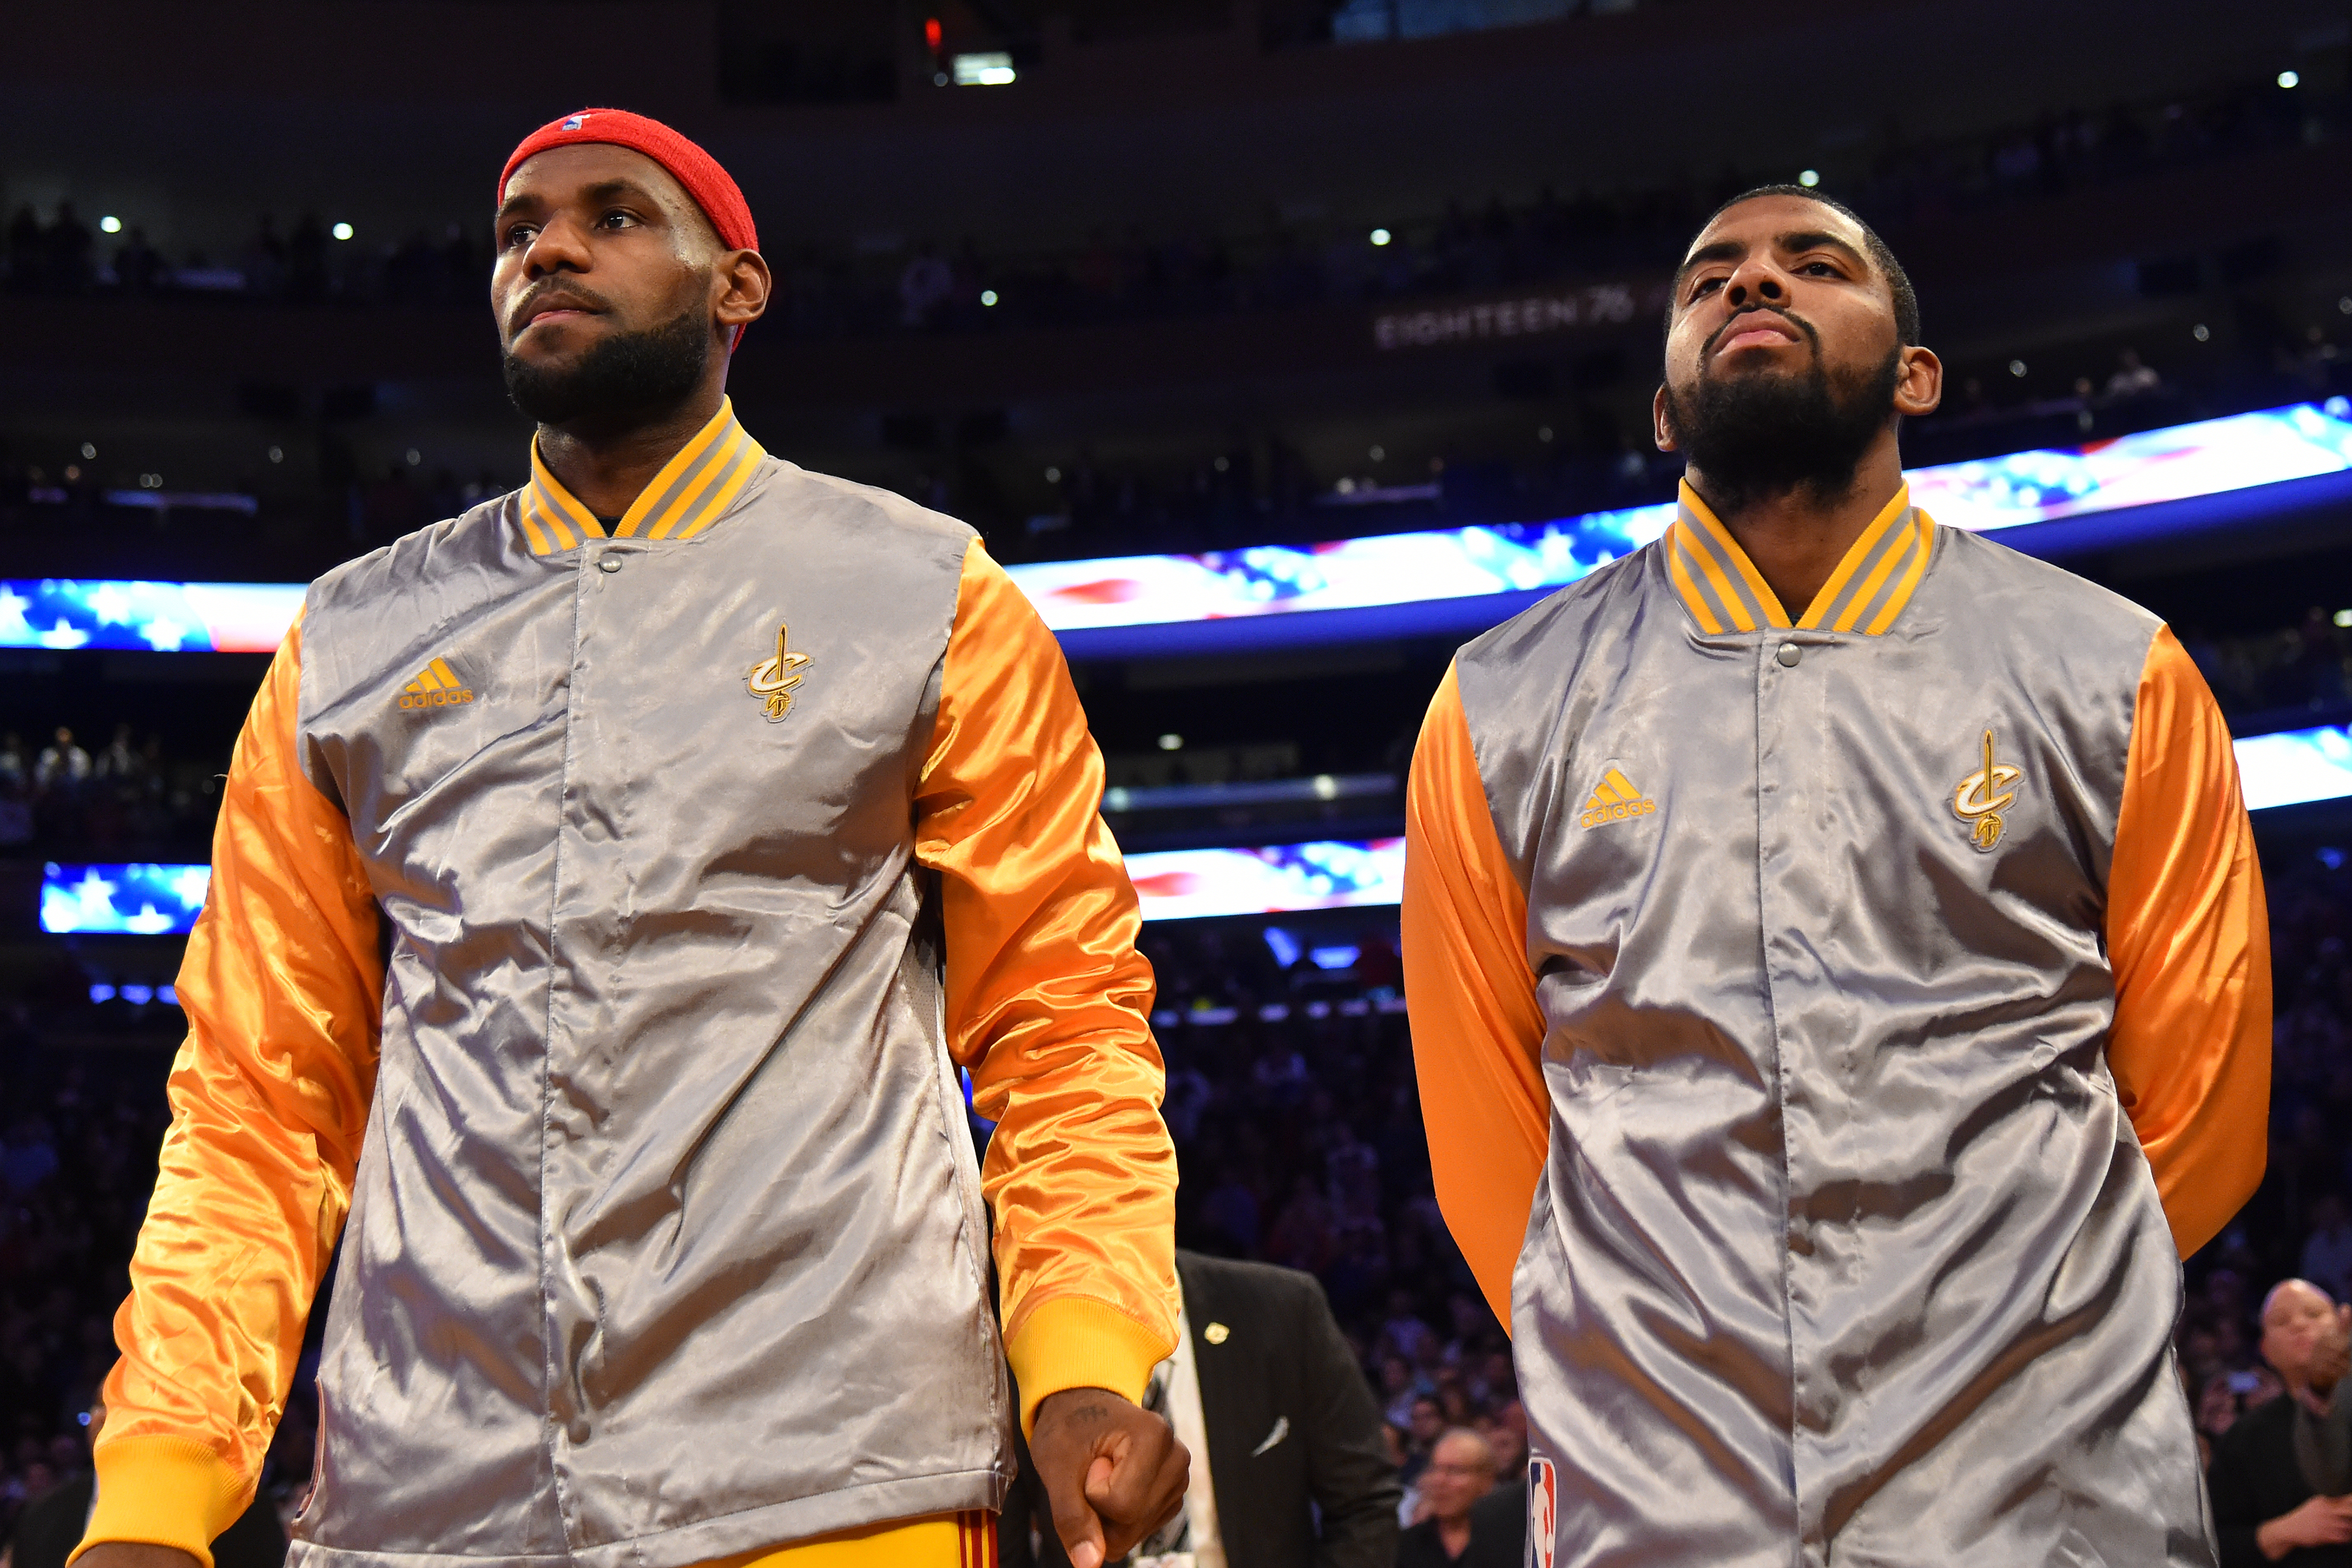 LeBron James and Kyrie Irving get in the zone.